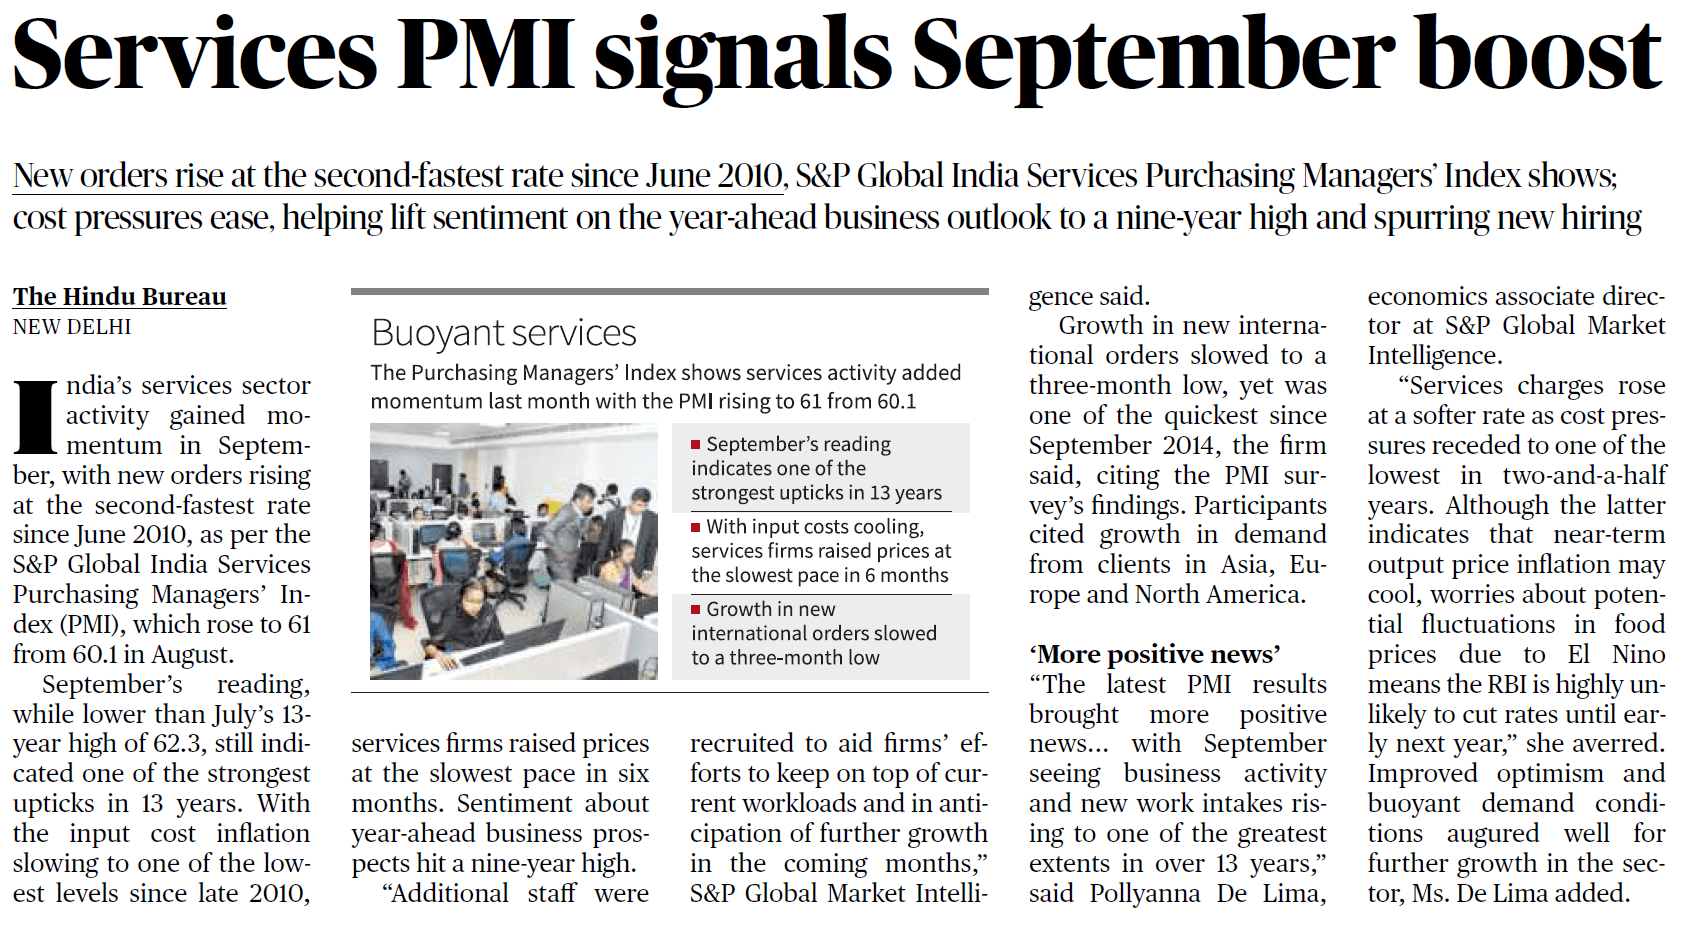 Services PM signals September boost